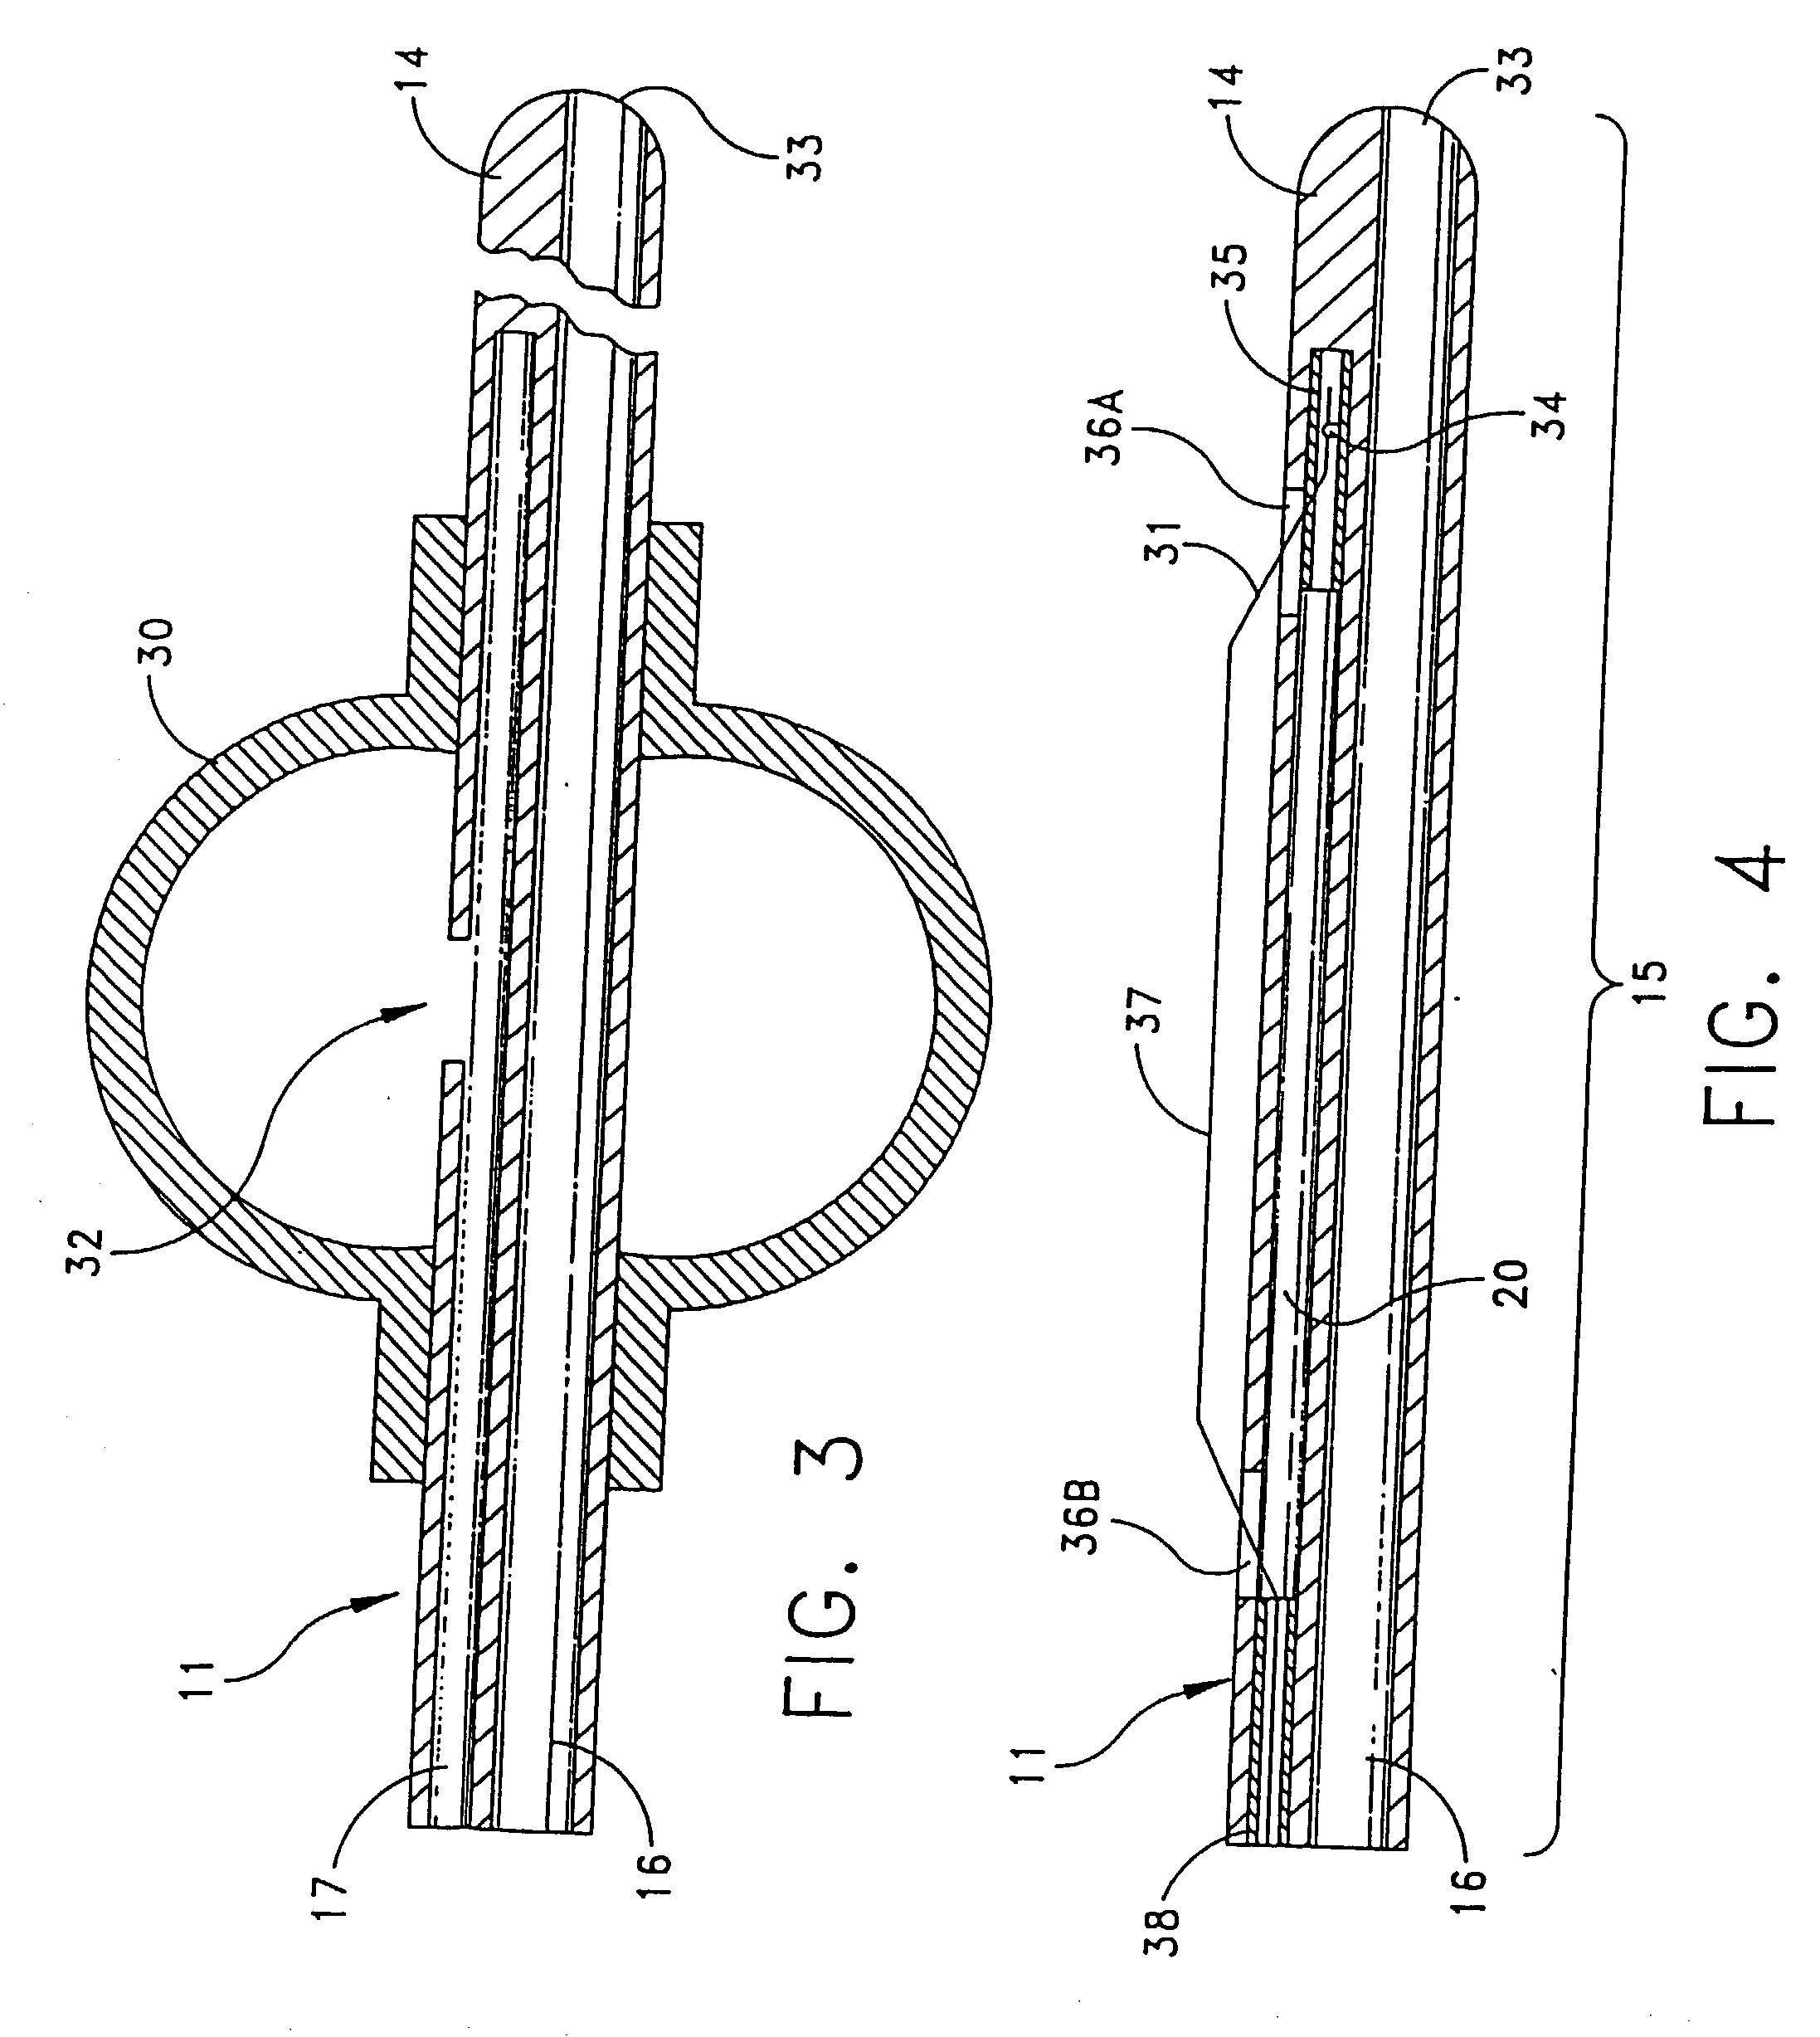 Apparatus for performing diagnostic and therapeutic modalities in the biliary tree